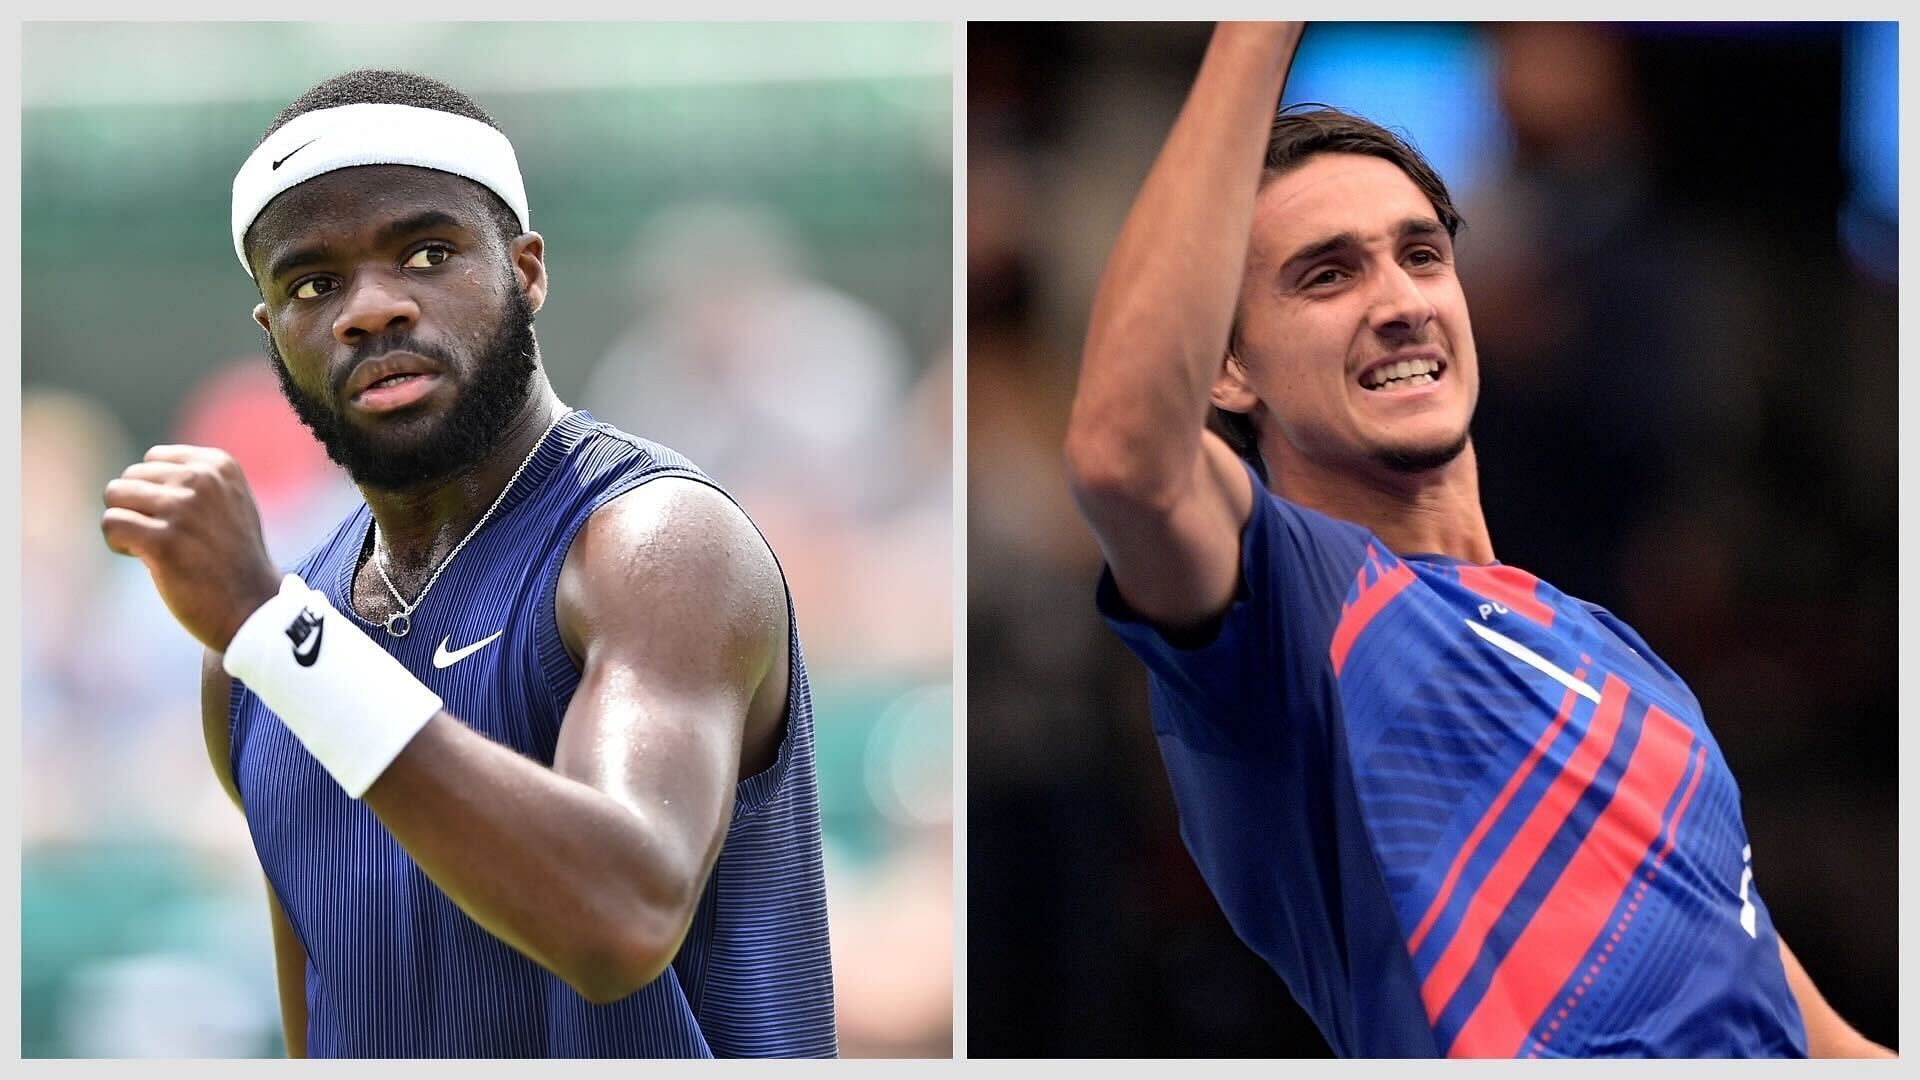 Shanghai Masters 2023: Frances Tiafoe vs Lorenzo Sonego preview, head-to-head, prediction, odds, and pick